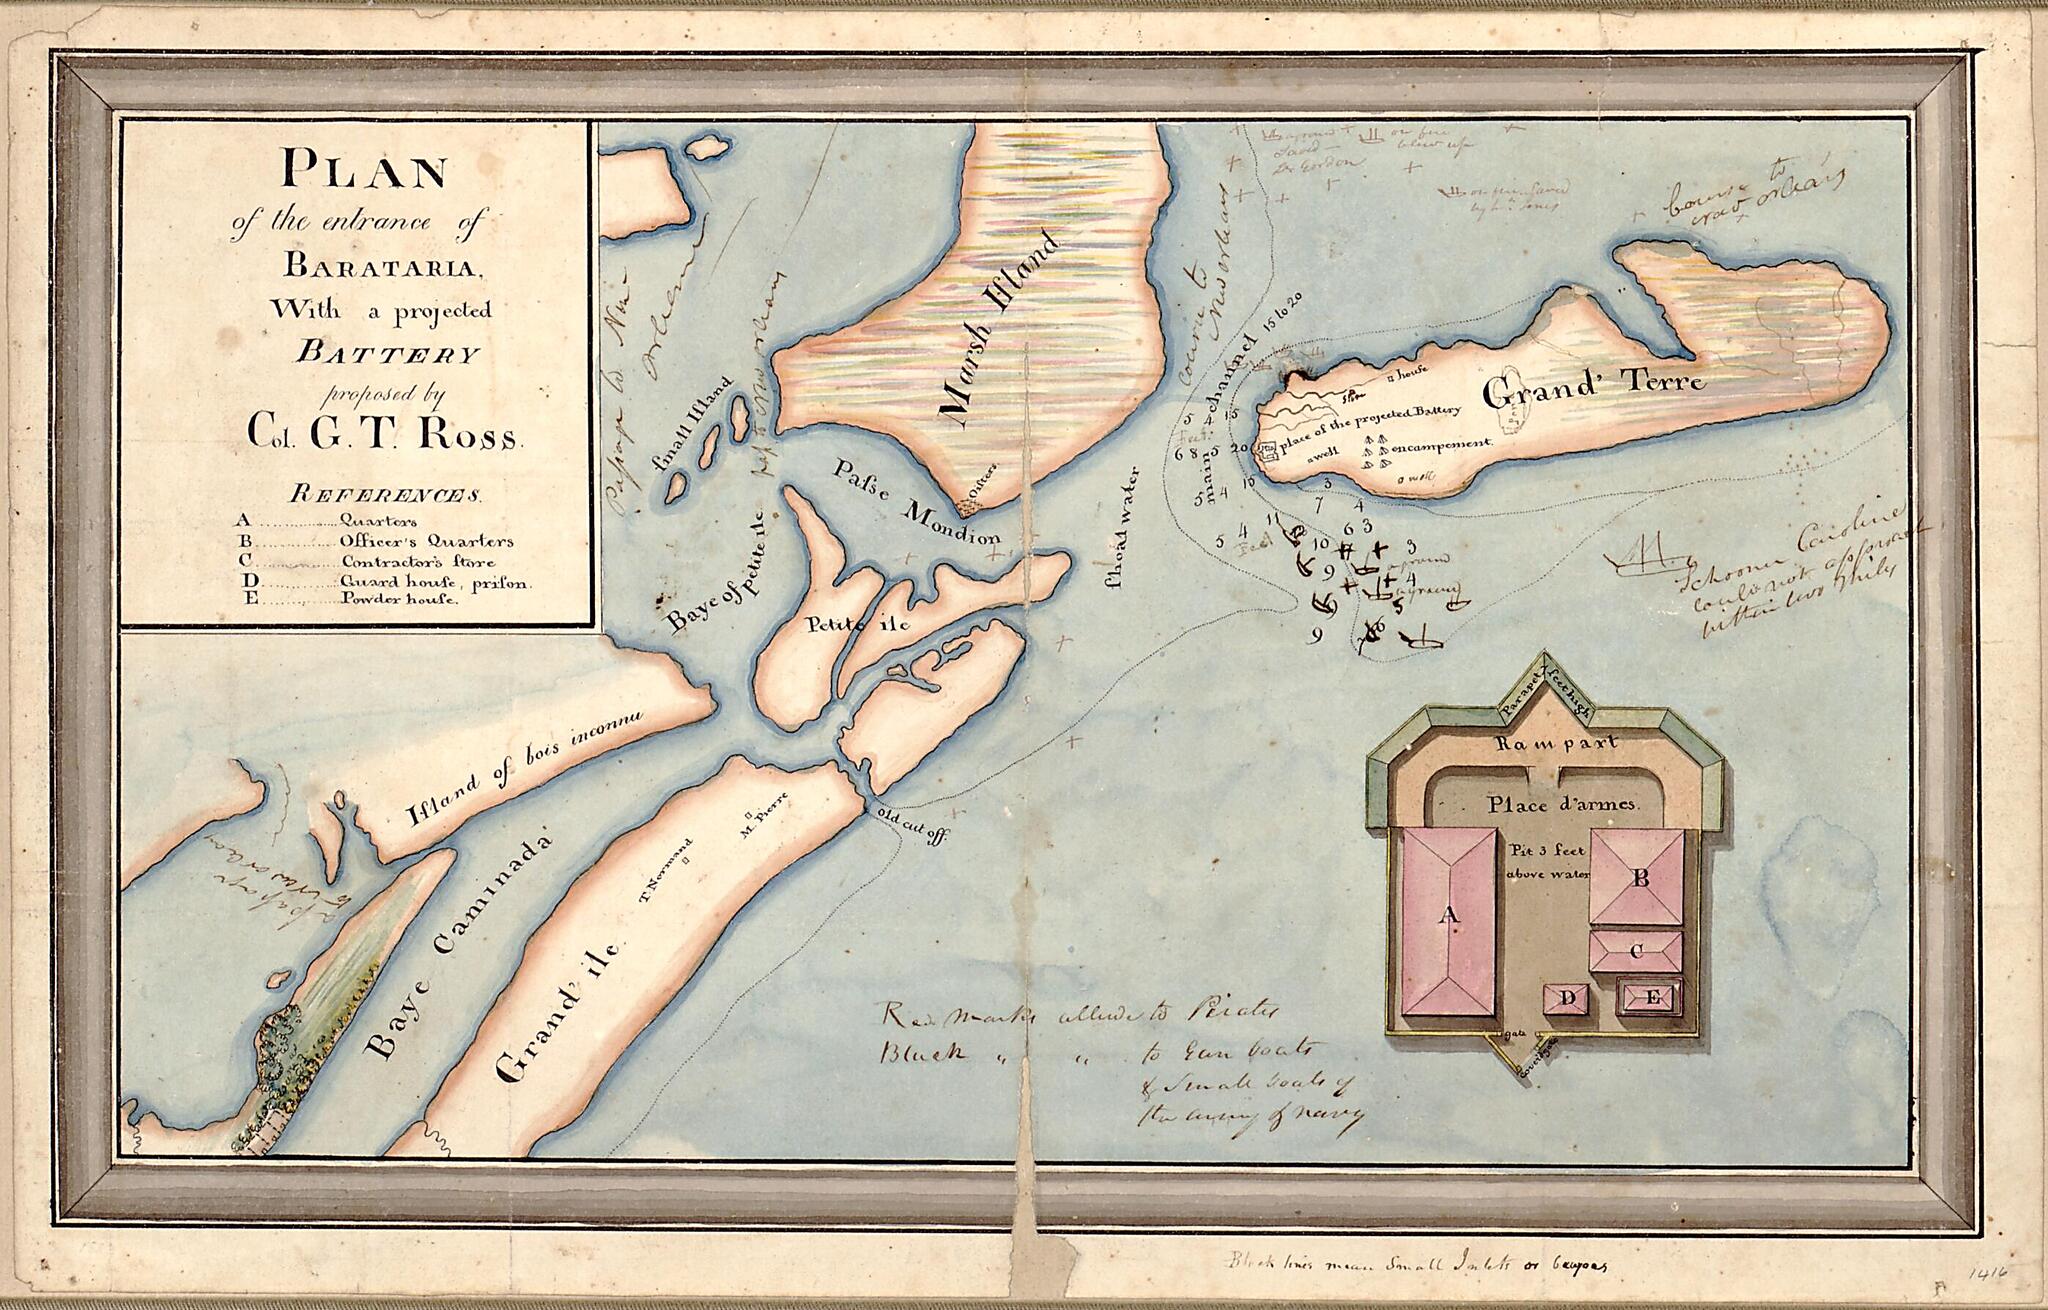 This old map of Plan of the Entrance of Barataria, With a Projected Battery Proposed by Col. G.T. Ross from 1812 was created by G.T. Ross in 1812